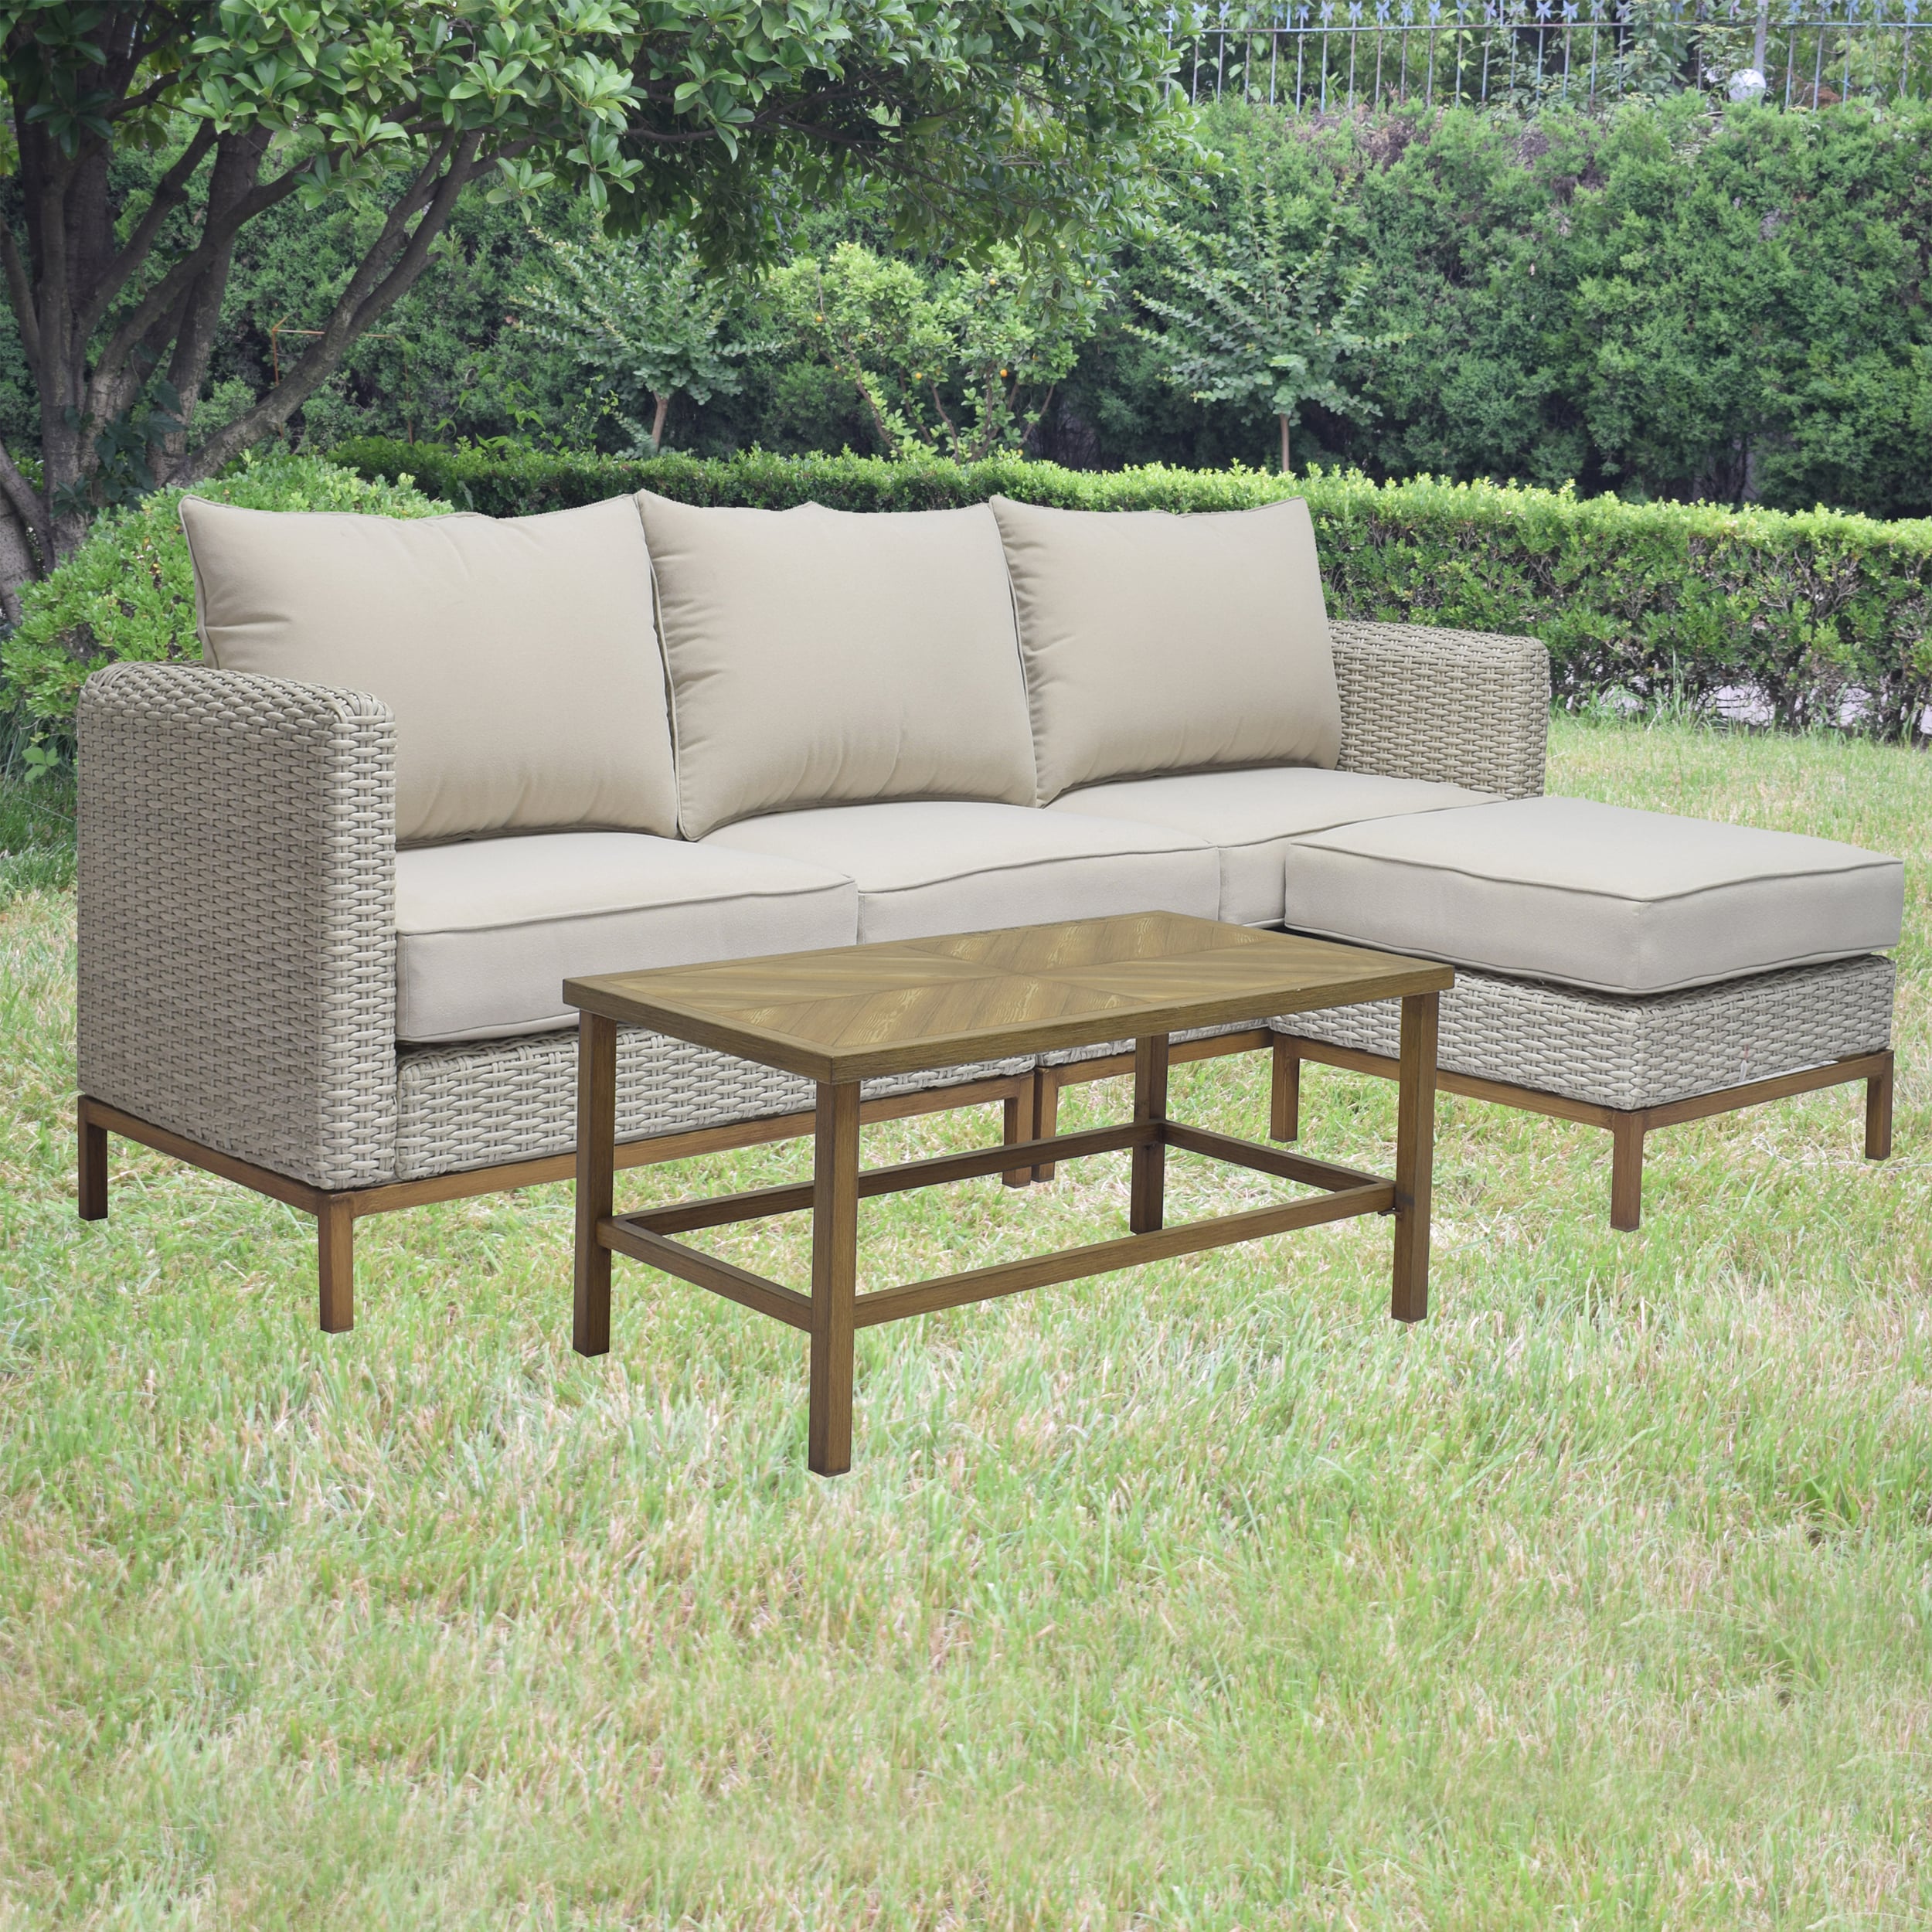 at the Springs Off-white Cushions Wicker department Sets Origin Veda 4-Piece in Patio Patio with Conversation 21 Conversation Set